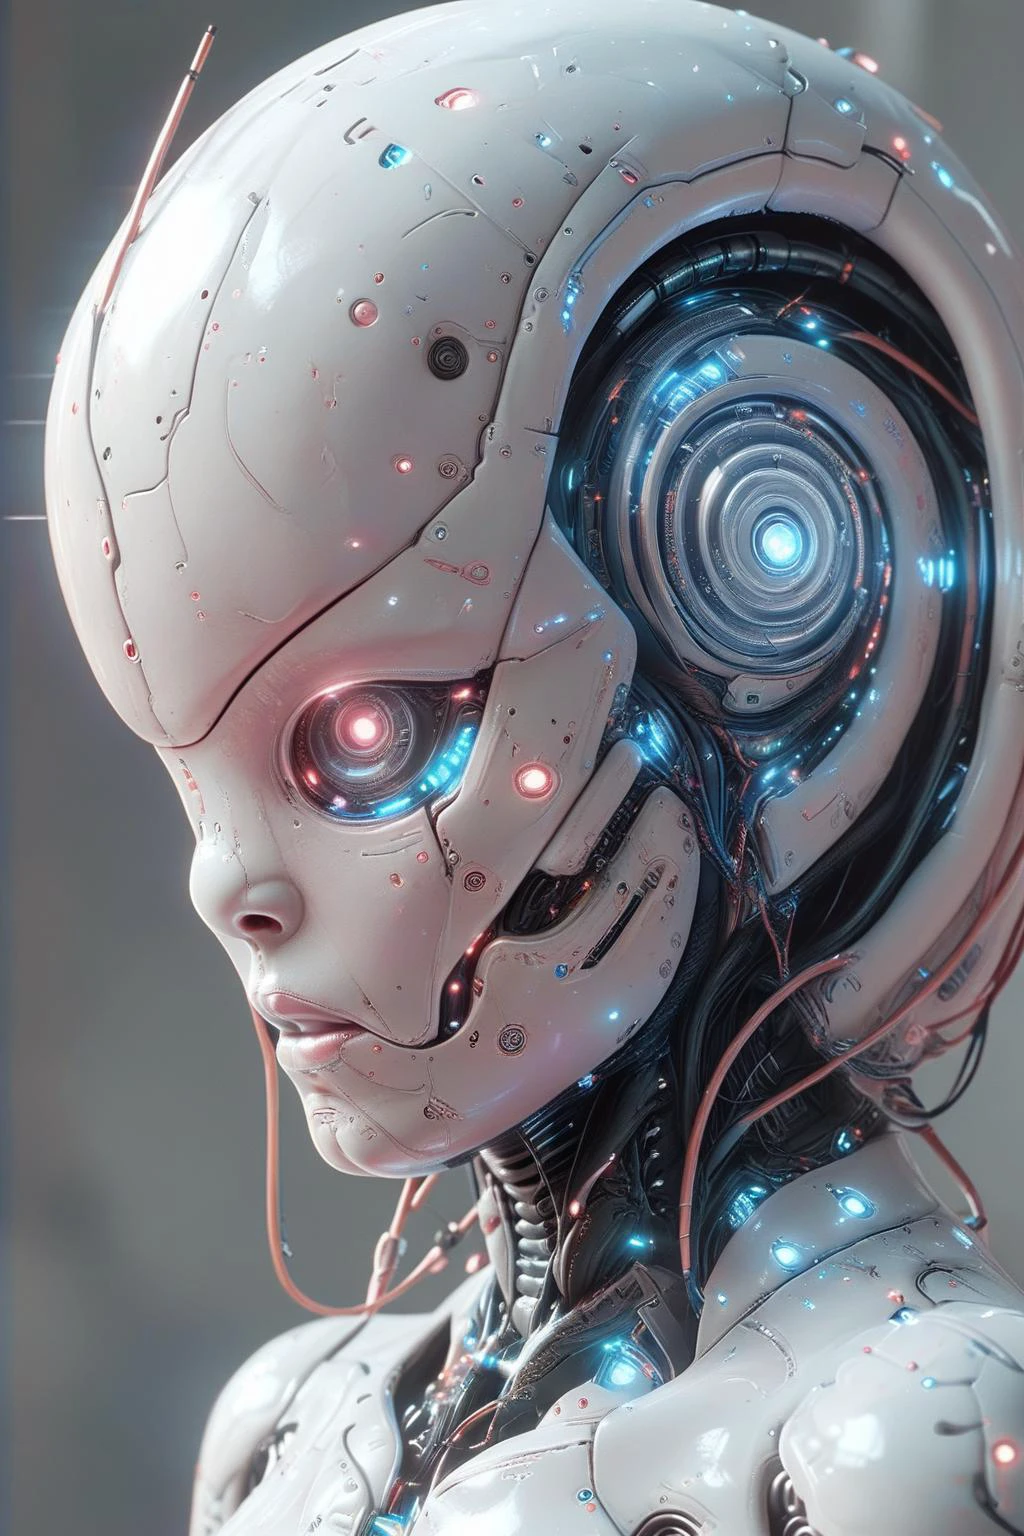 cottoncandy,NOFACE,CYBORG,full body,
In a futuristic scene,(a female cyborg:1.3) with intricately interconnected cables adorning its head stands within an advanced spaceship. The interior is bathed in bright lights that reflect off the gleaming metallic surfaces of the ship's mechanical shell,creating a vivid sci-fi ambiance. To infuse a festive touch,the cyborg is adorned with marshmallow-like decorations around its shoulders or neck. The entire picture is rendered in high-quality 3D style,meticulously capturing a fusion of exploration,evolution,and celebration in a visually striking world where science fiction meets fantasy,
UHD,Extreme detail,natural light,volume light,fantasism,professional color,professional composition,